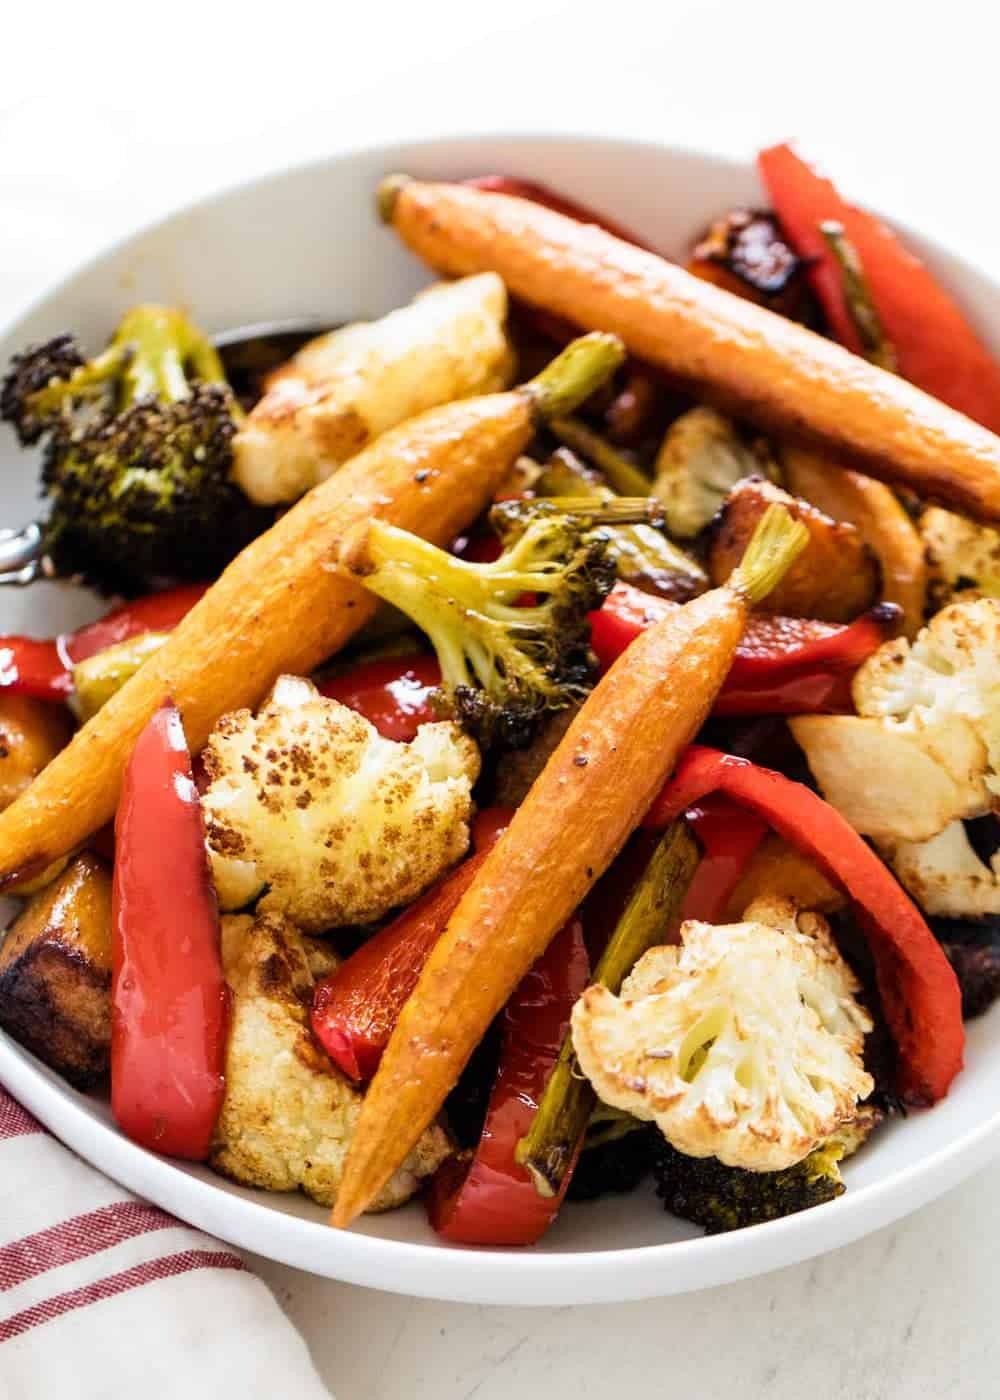 Baked vegetables in a white bowl.